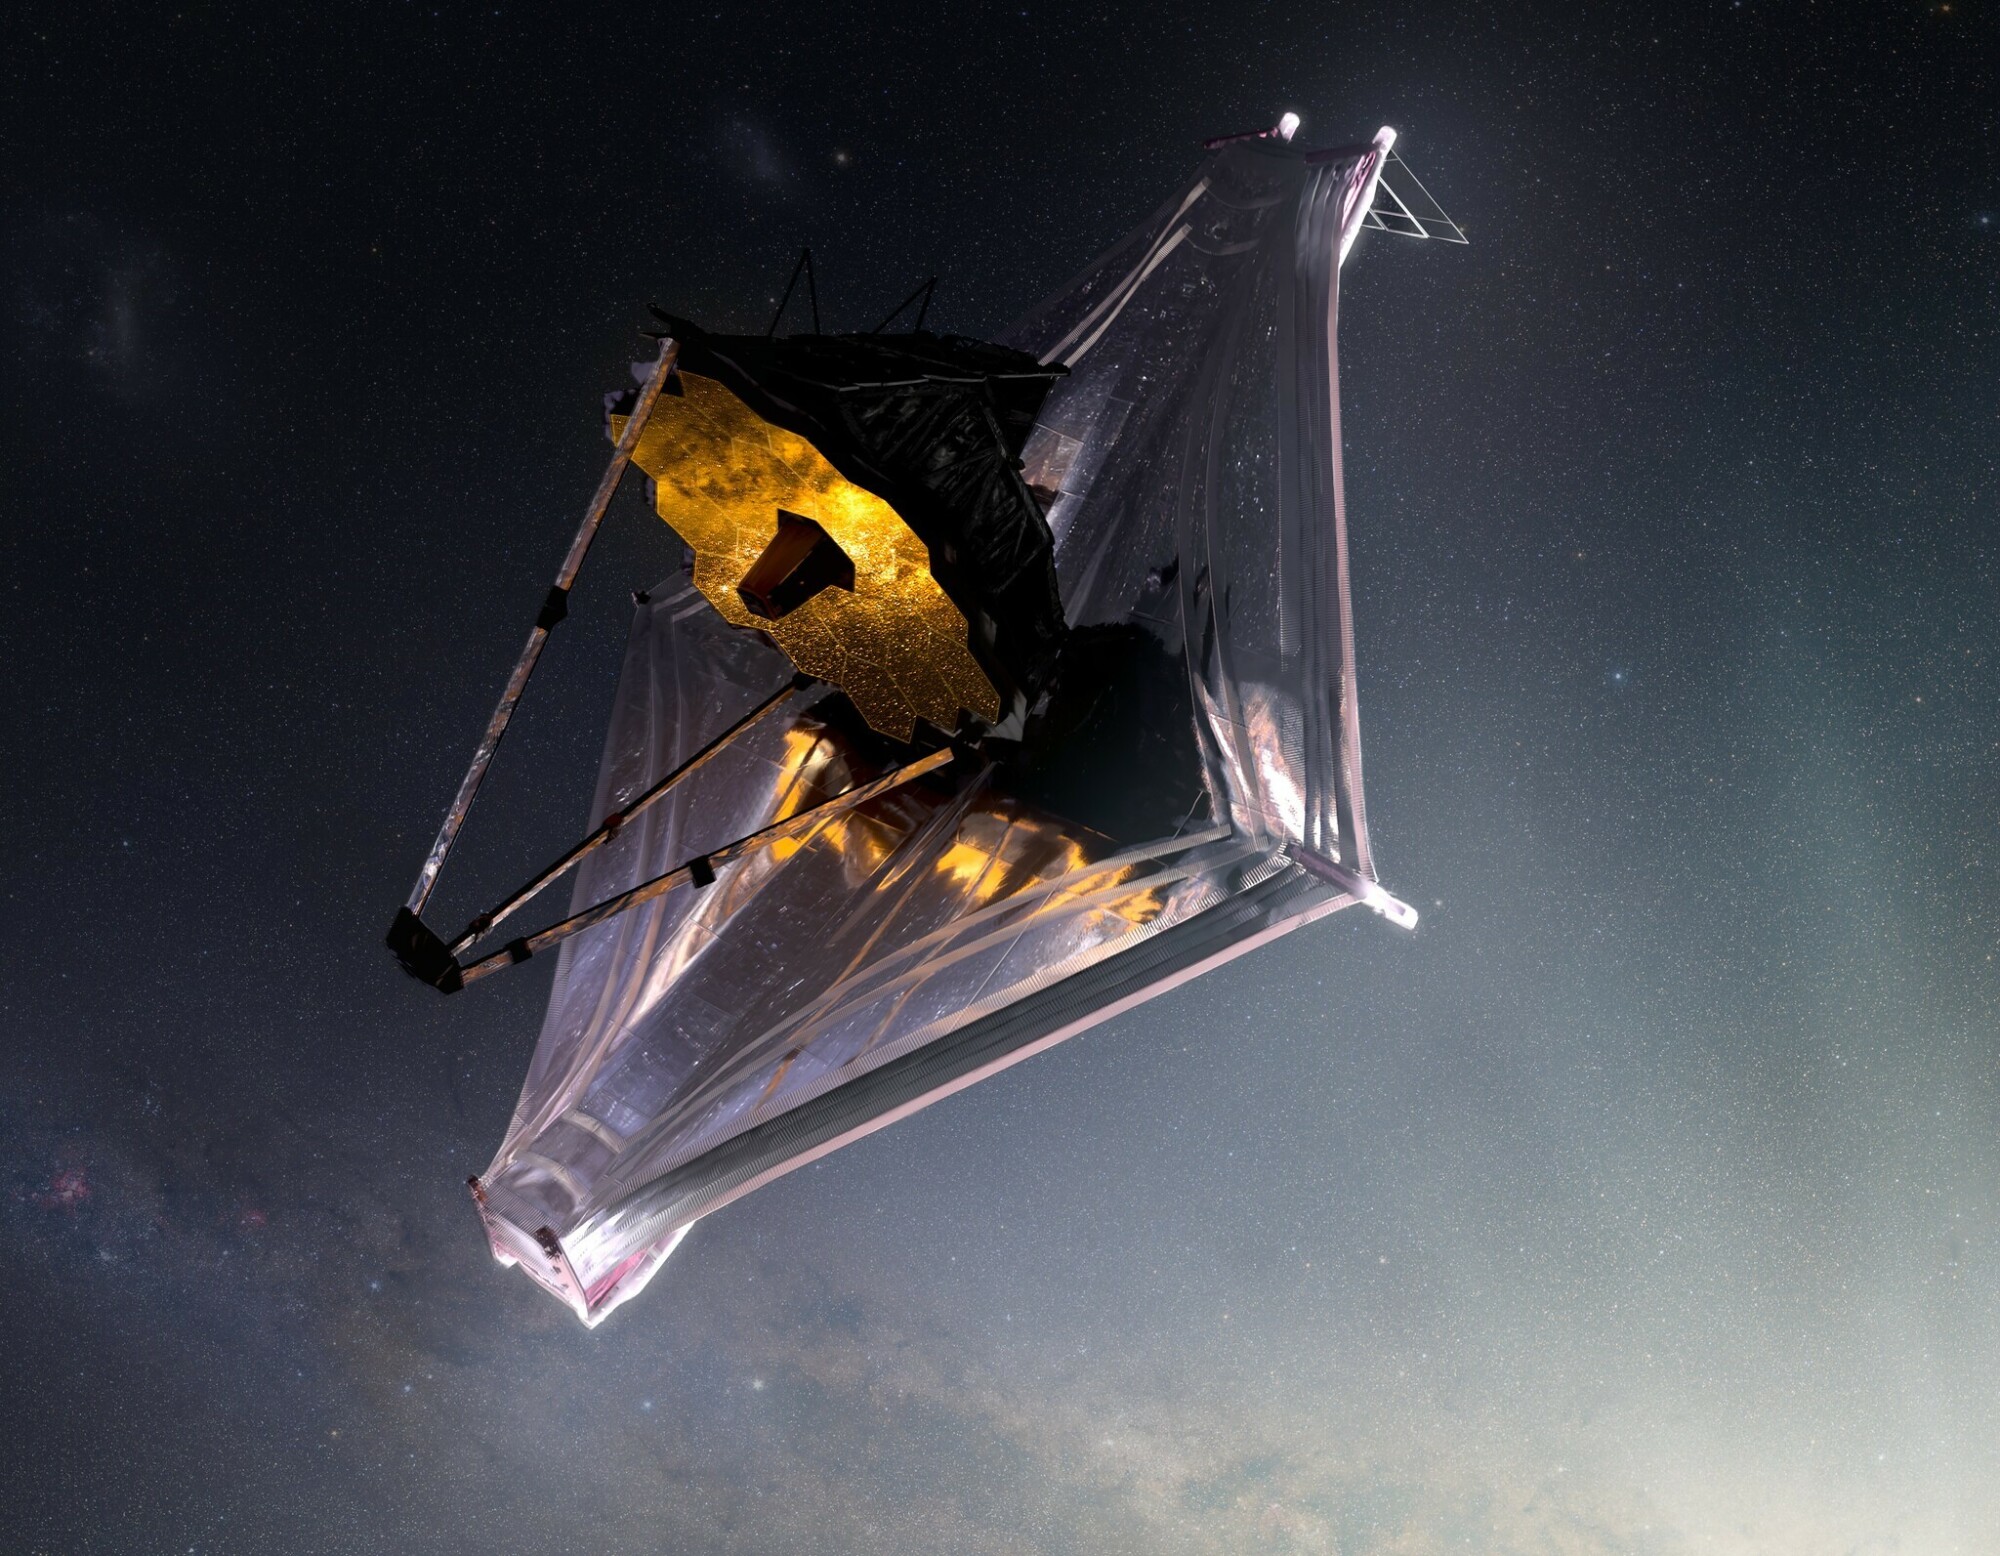 the James Webb Space Telescope in space (illustration)